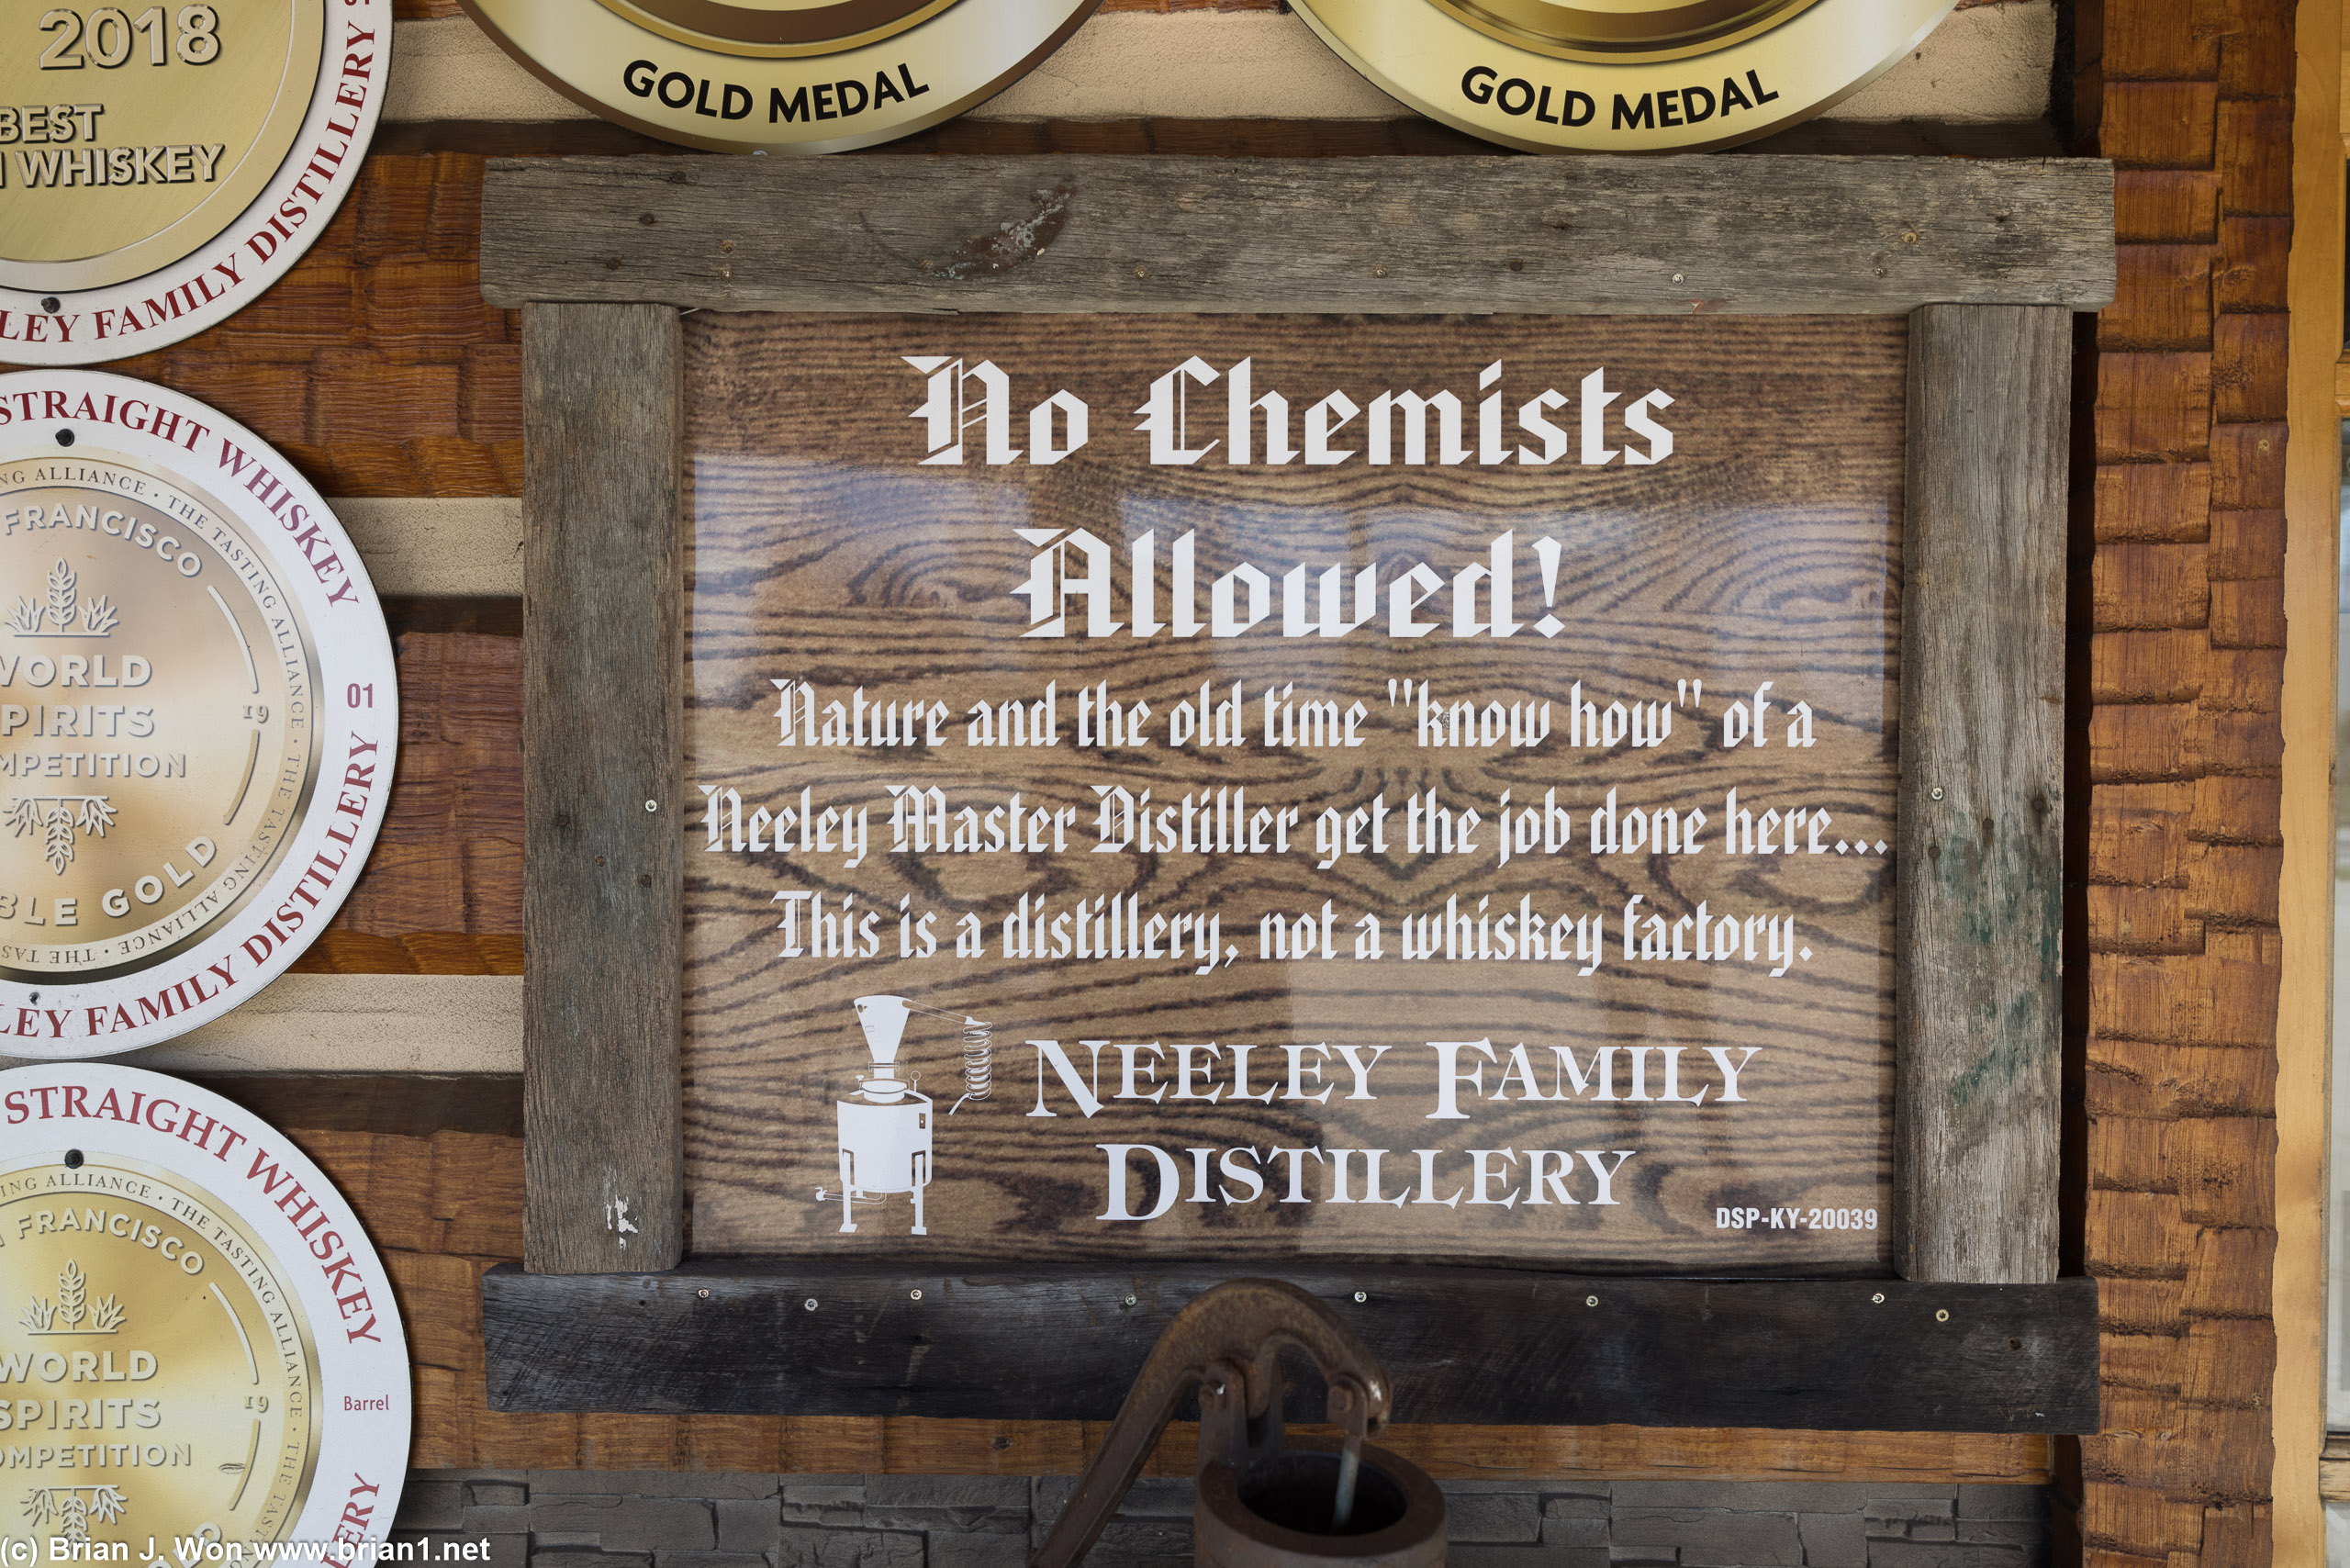 No chemists allowed? They're going to deny us entry! ;_;